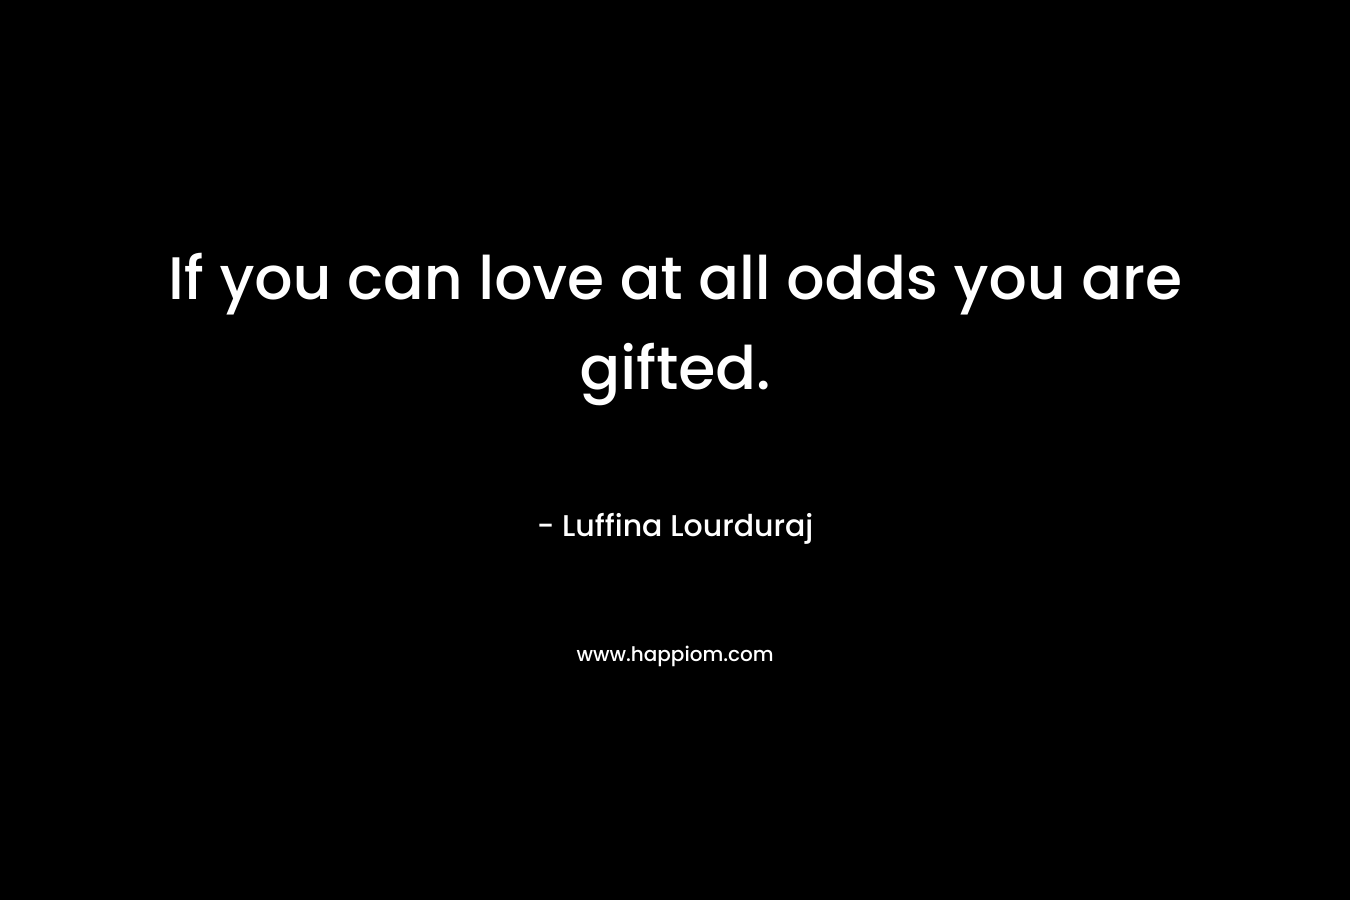 If you can love at all odds you are gifted.